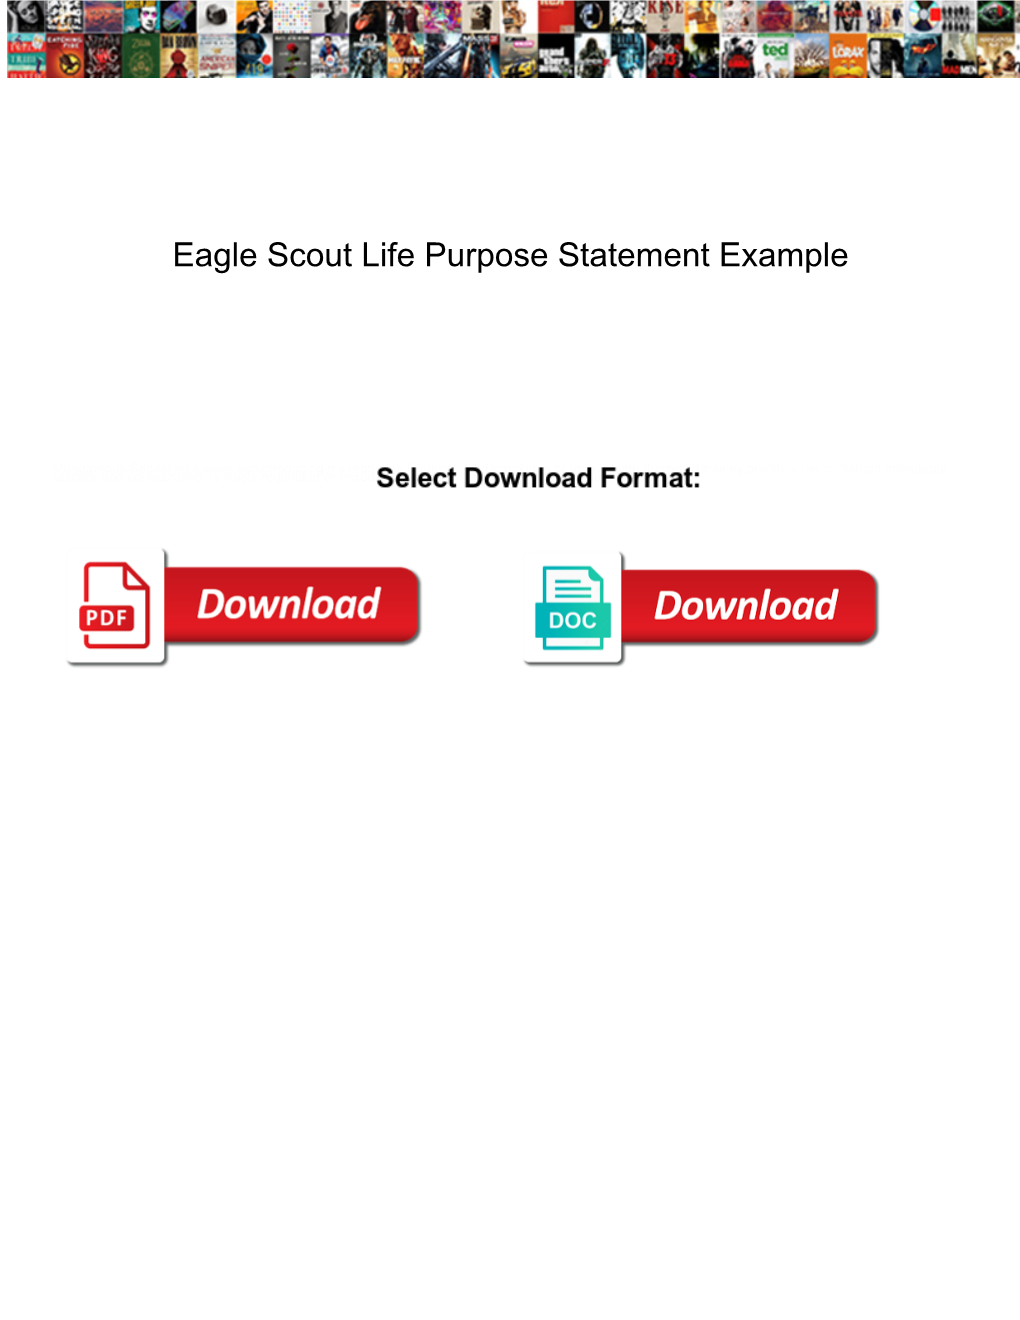 Eagle Scout Life Purpose Statement Example